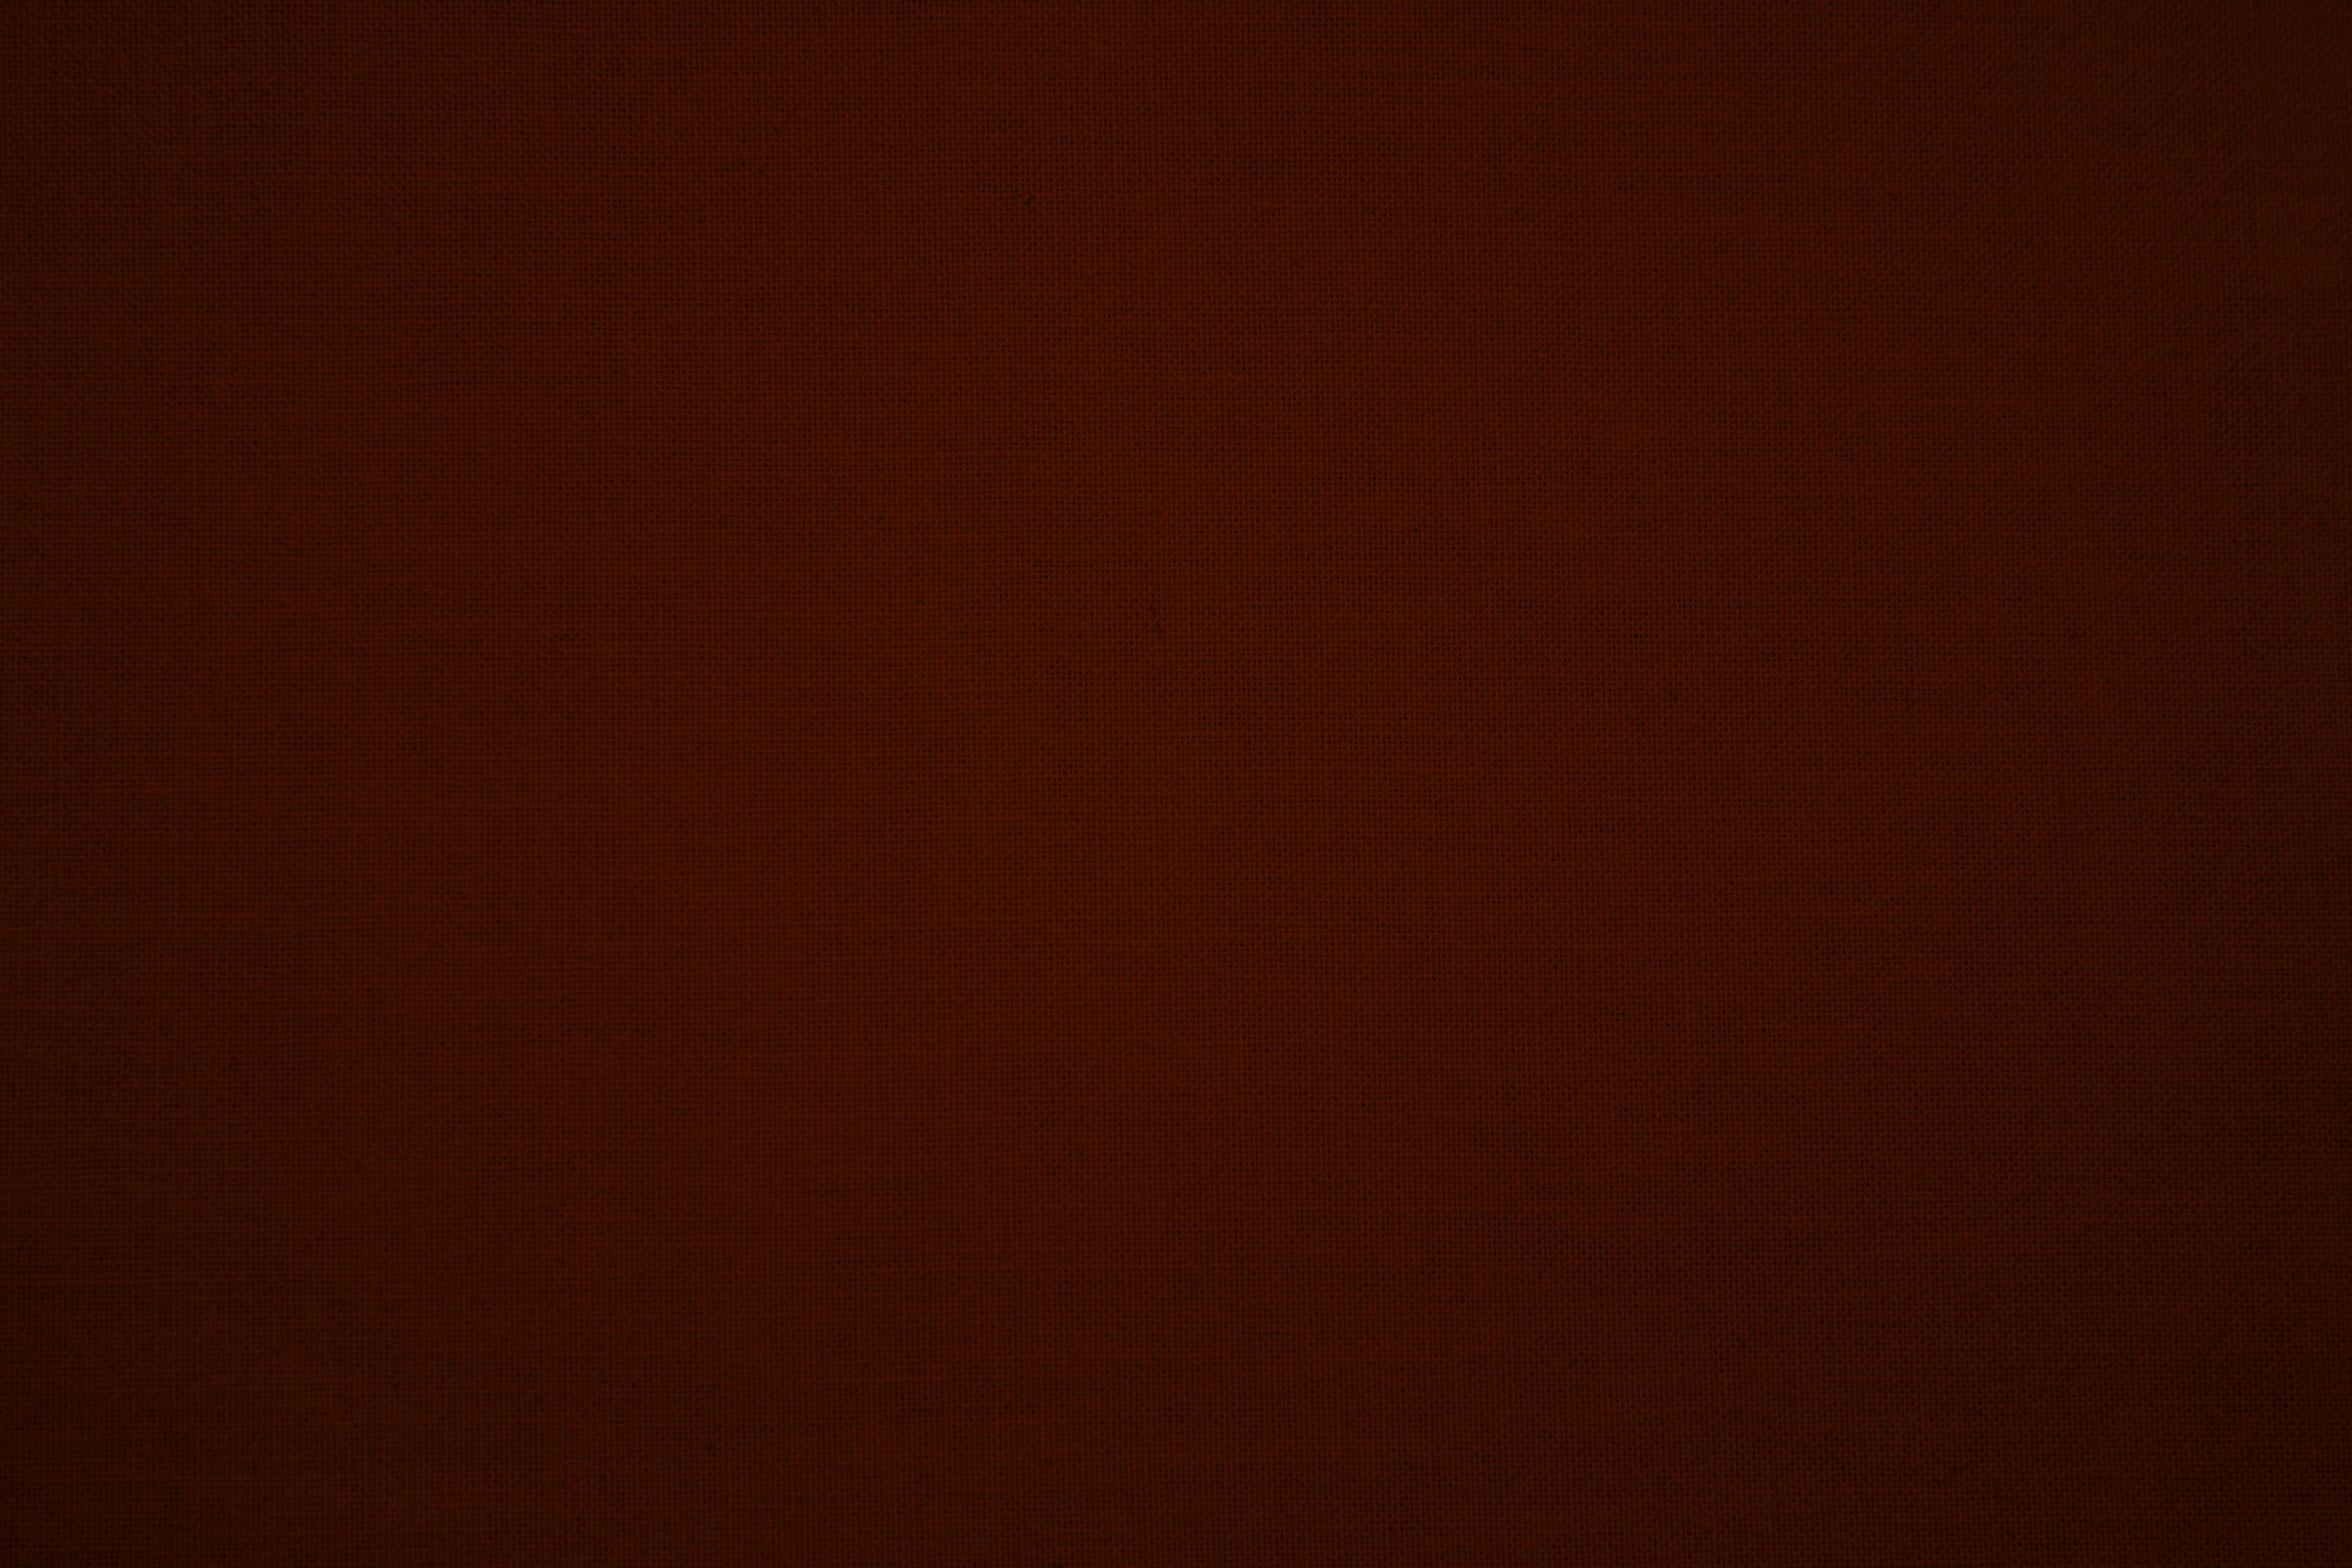 Dark Red Canvas Fabric Texture Picture Free Photograph Photos